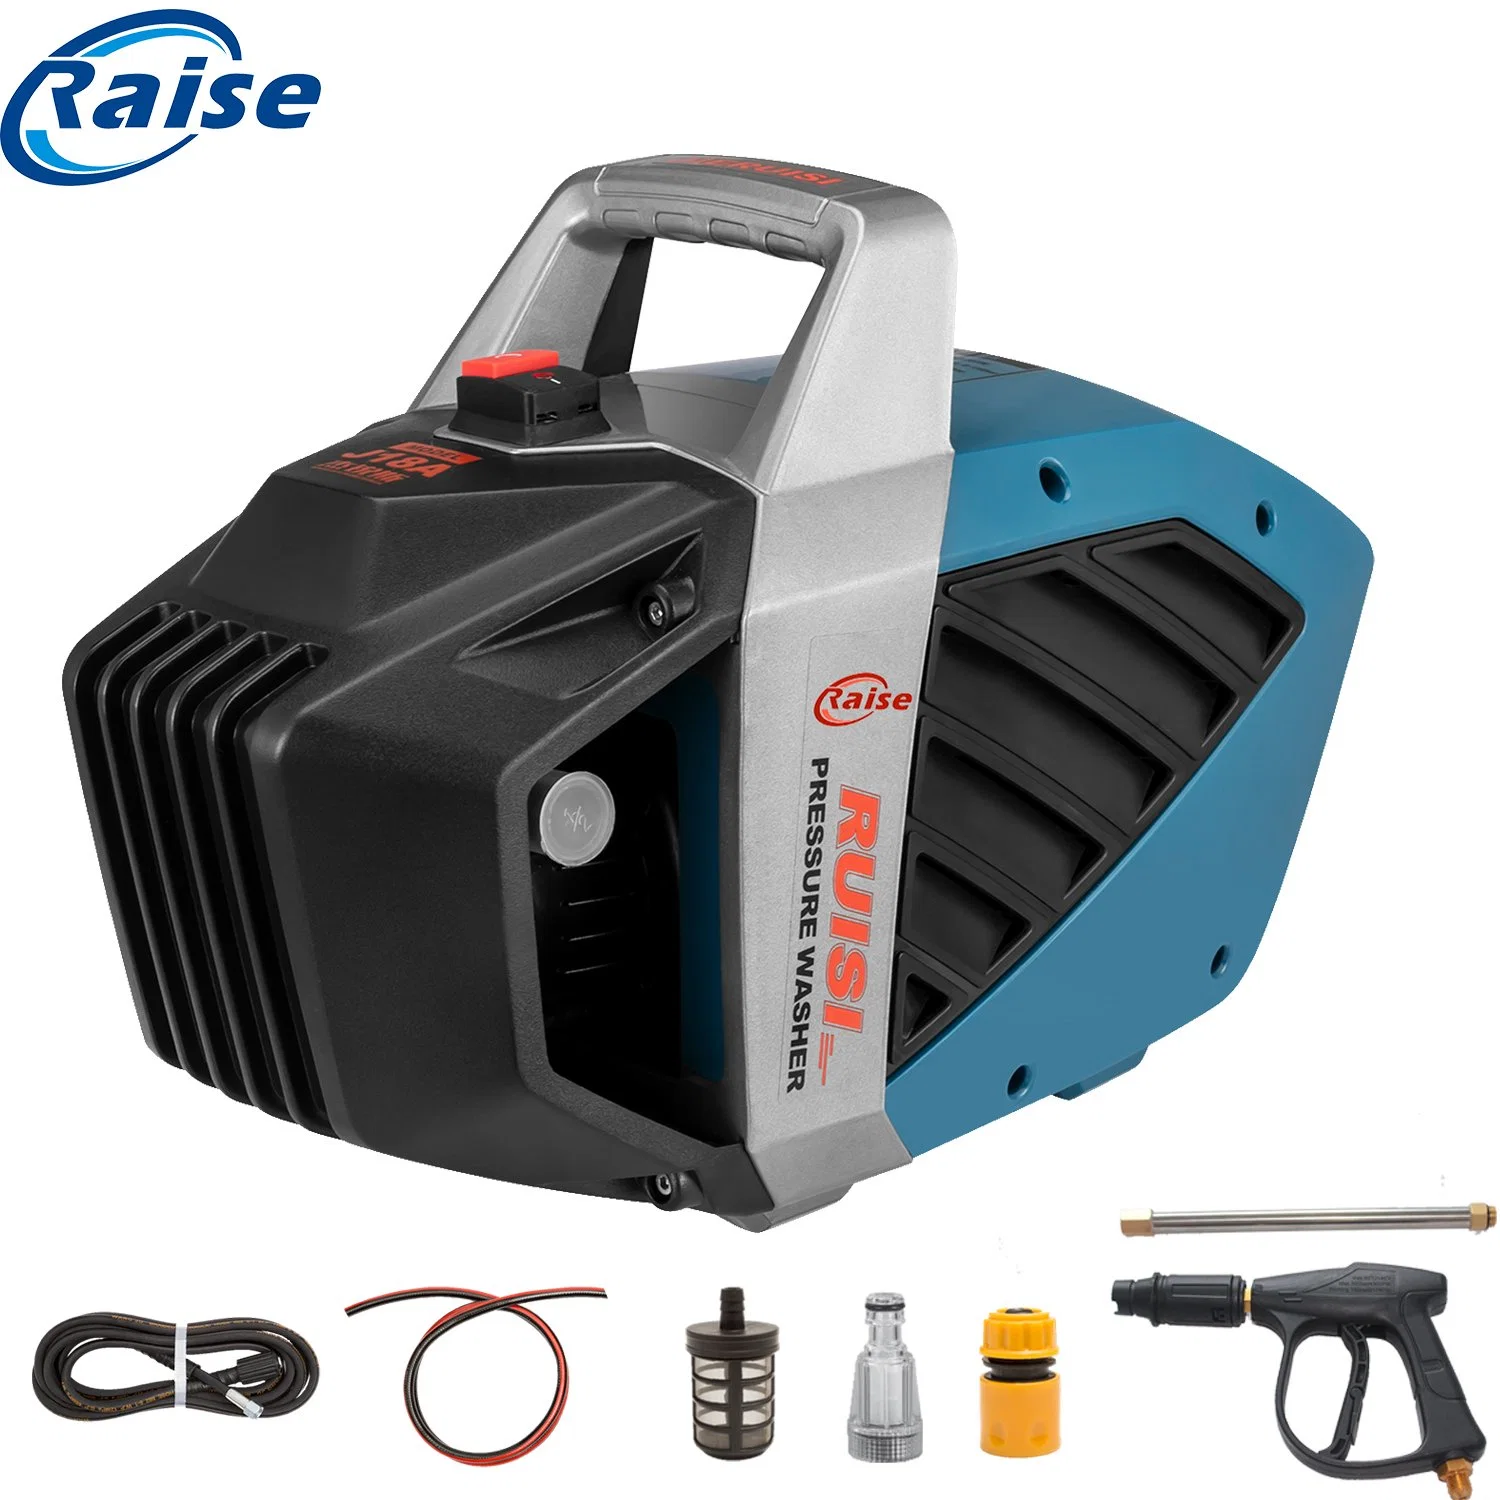 Cold Water Cleaner Tool Portable High Pressure Washer